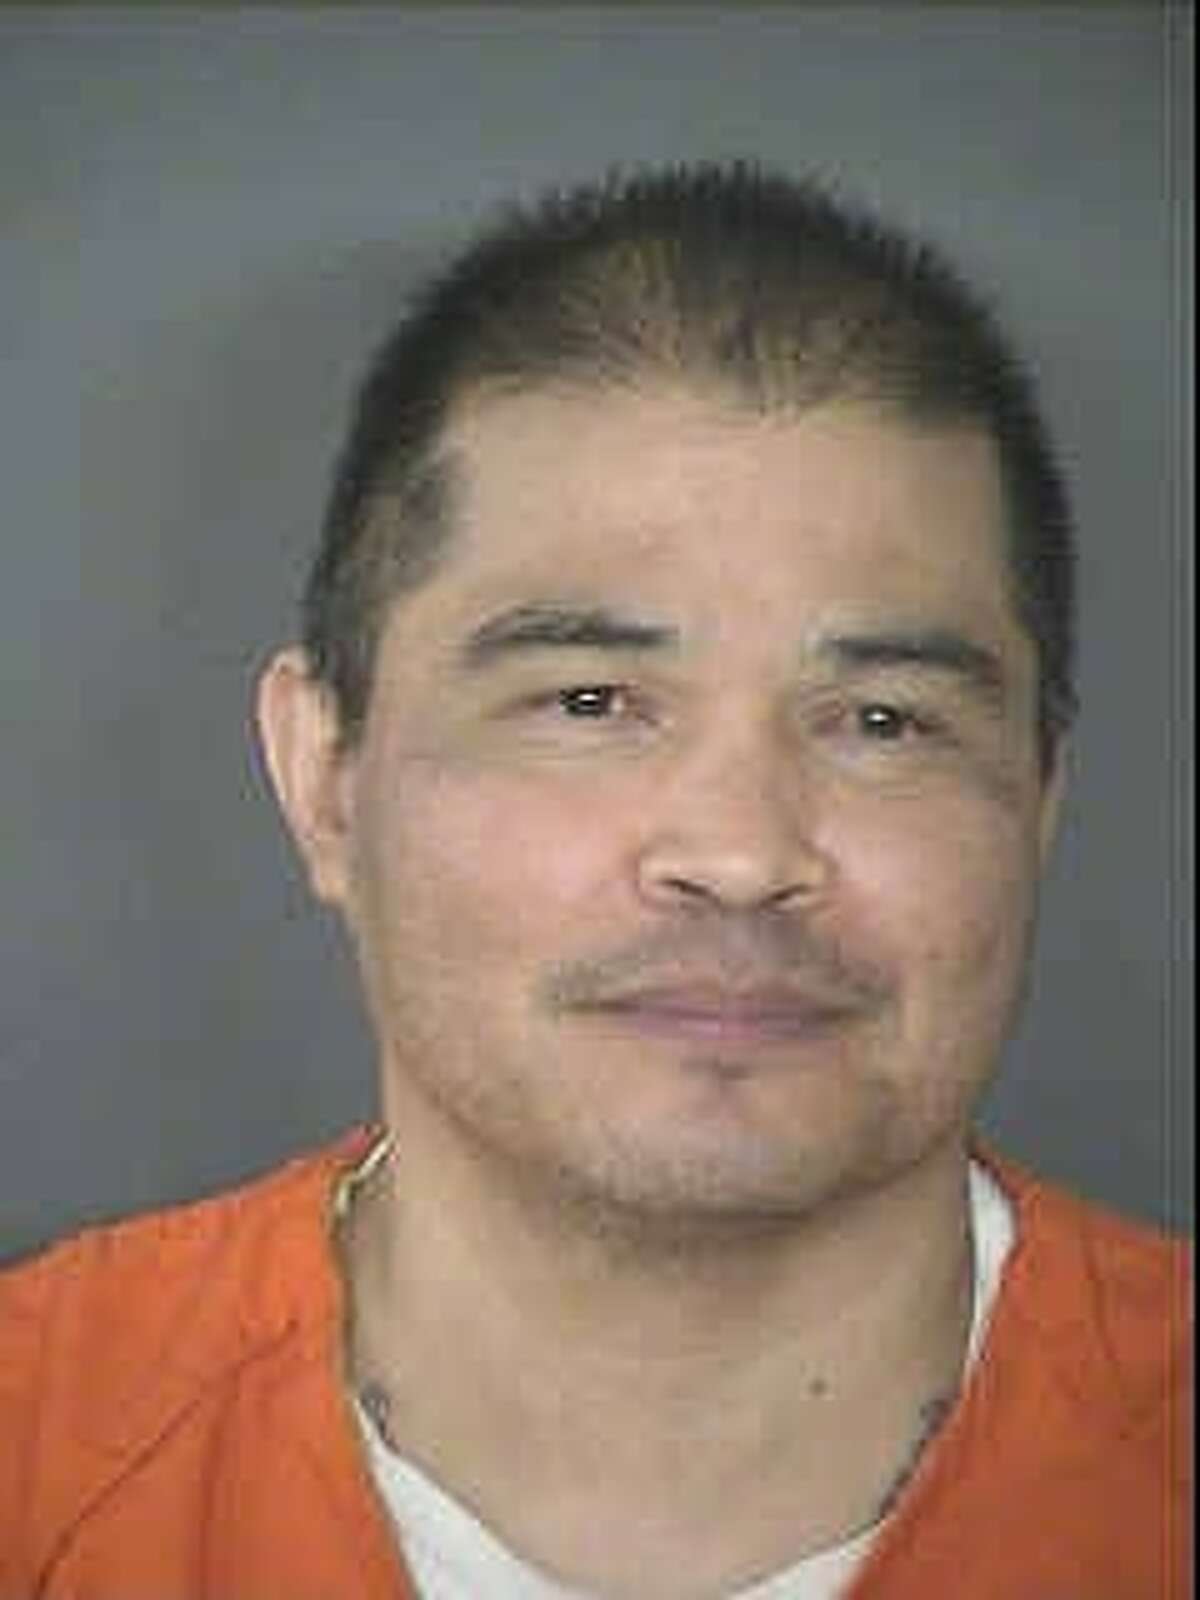 Martin Barrera Balboa, 41, is accused of fatally shooting a man playing basketball at a South Side community center in 2003. Courtesy photo